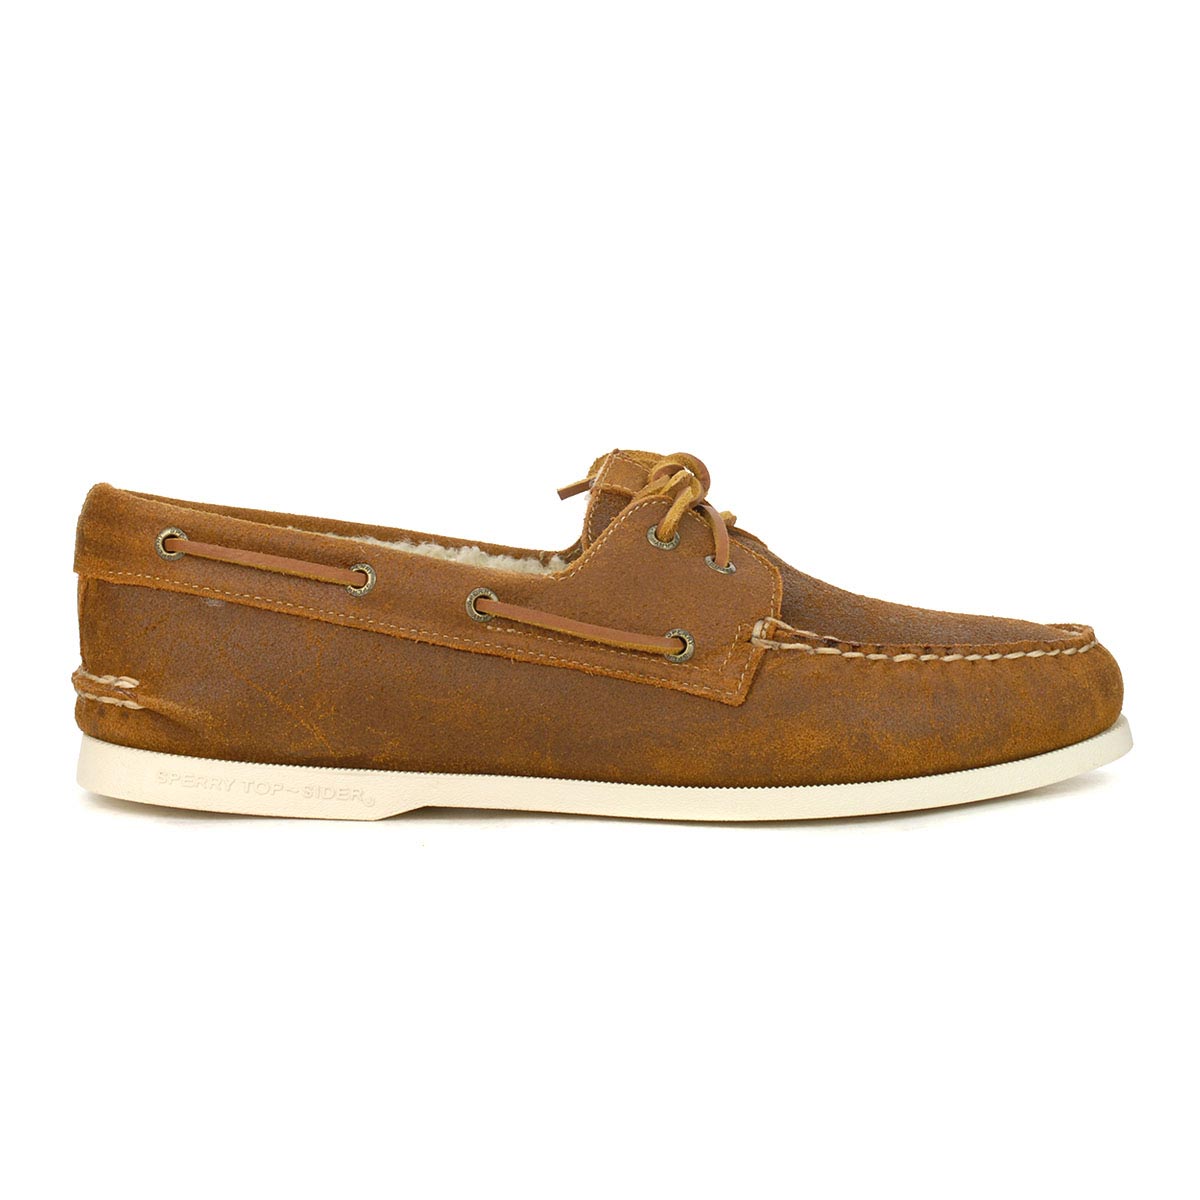 Sperry Men's Authentic Original 2-Eye Seacycled Shearling Tan Boat ...